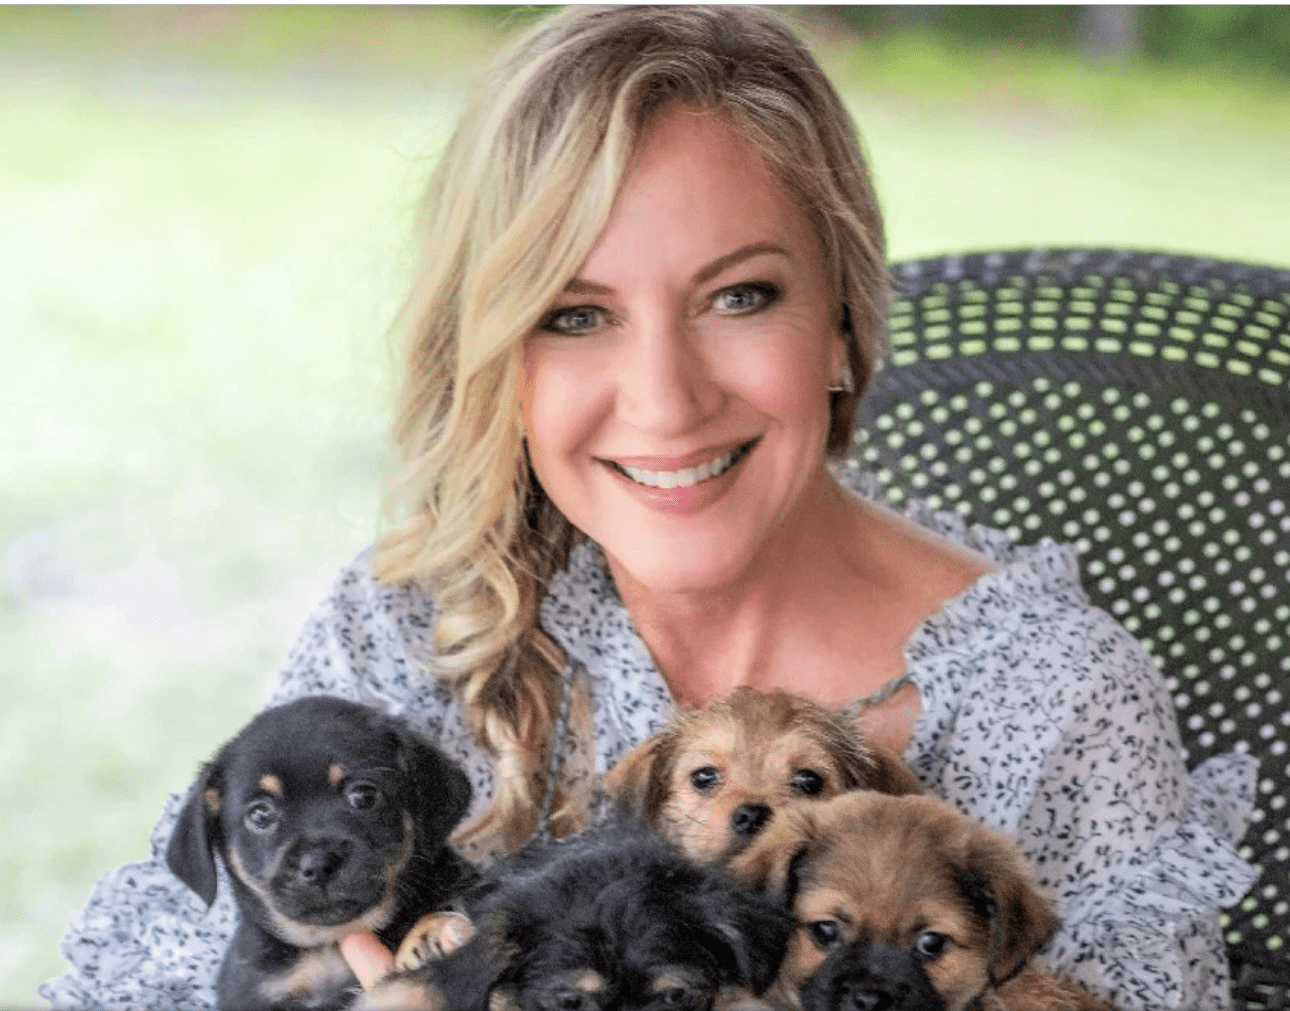 Laurie with puppies